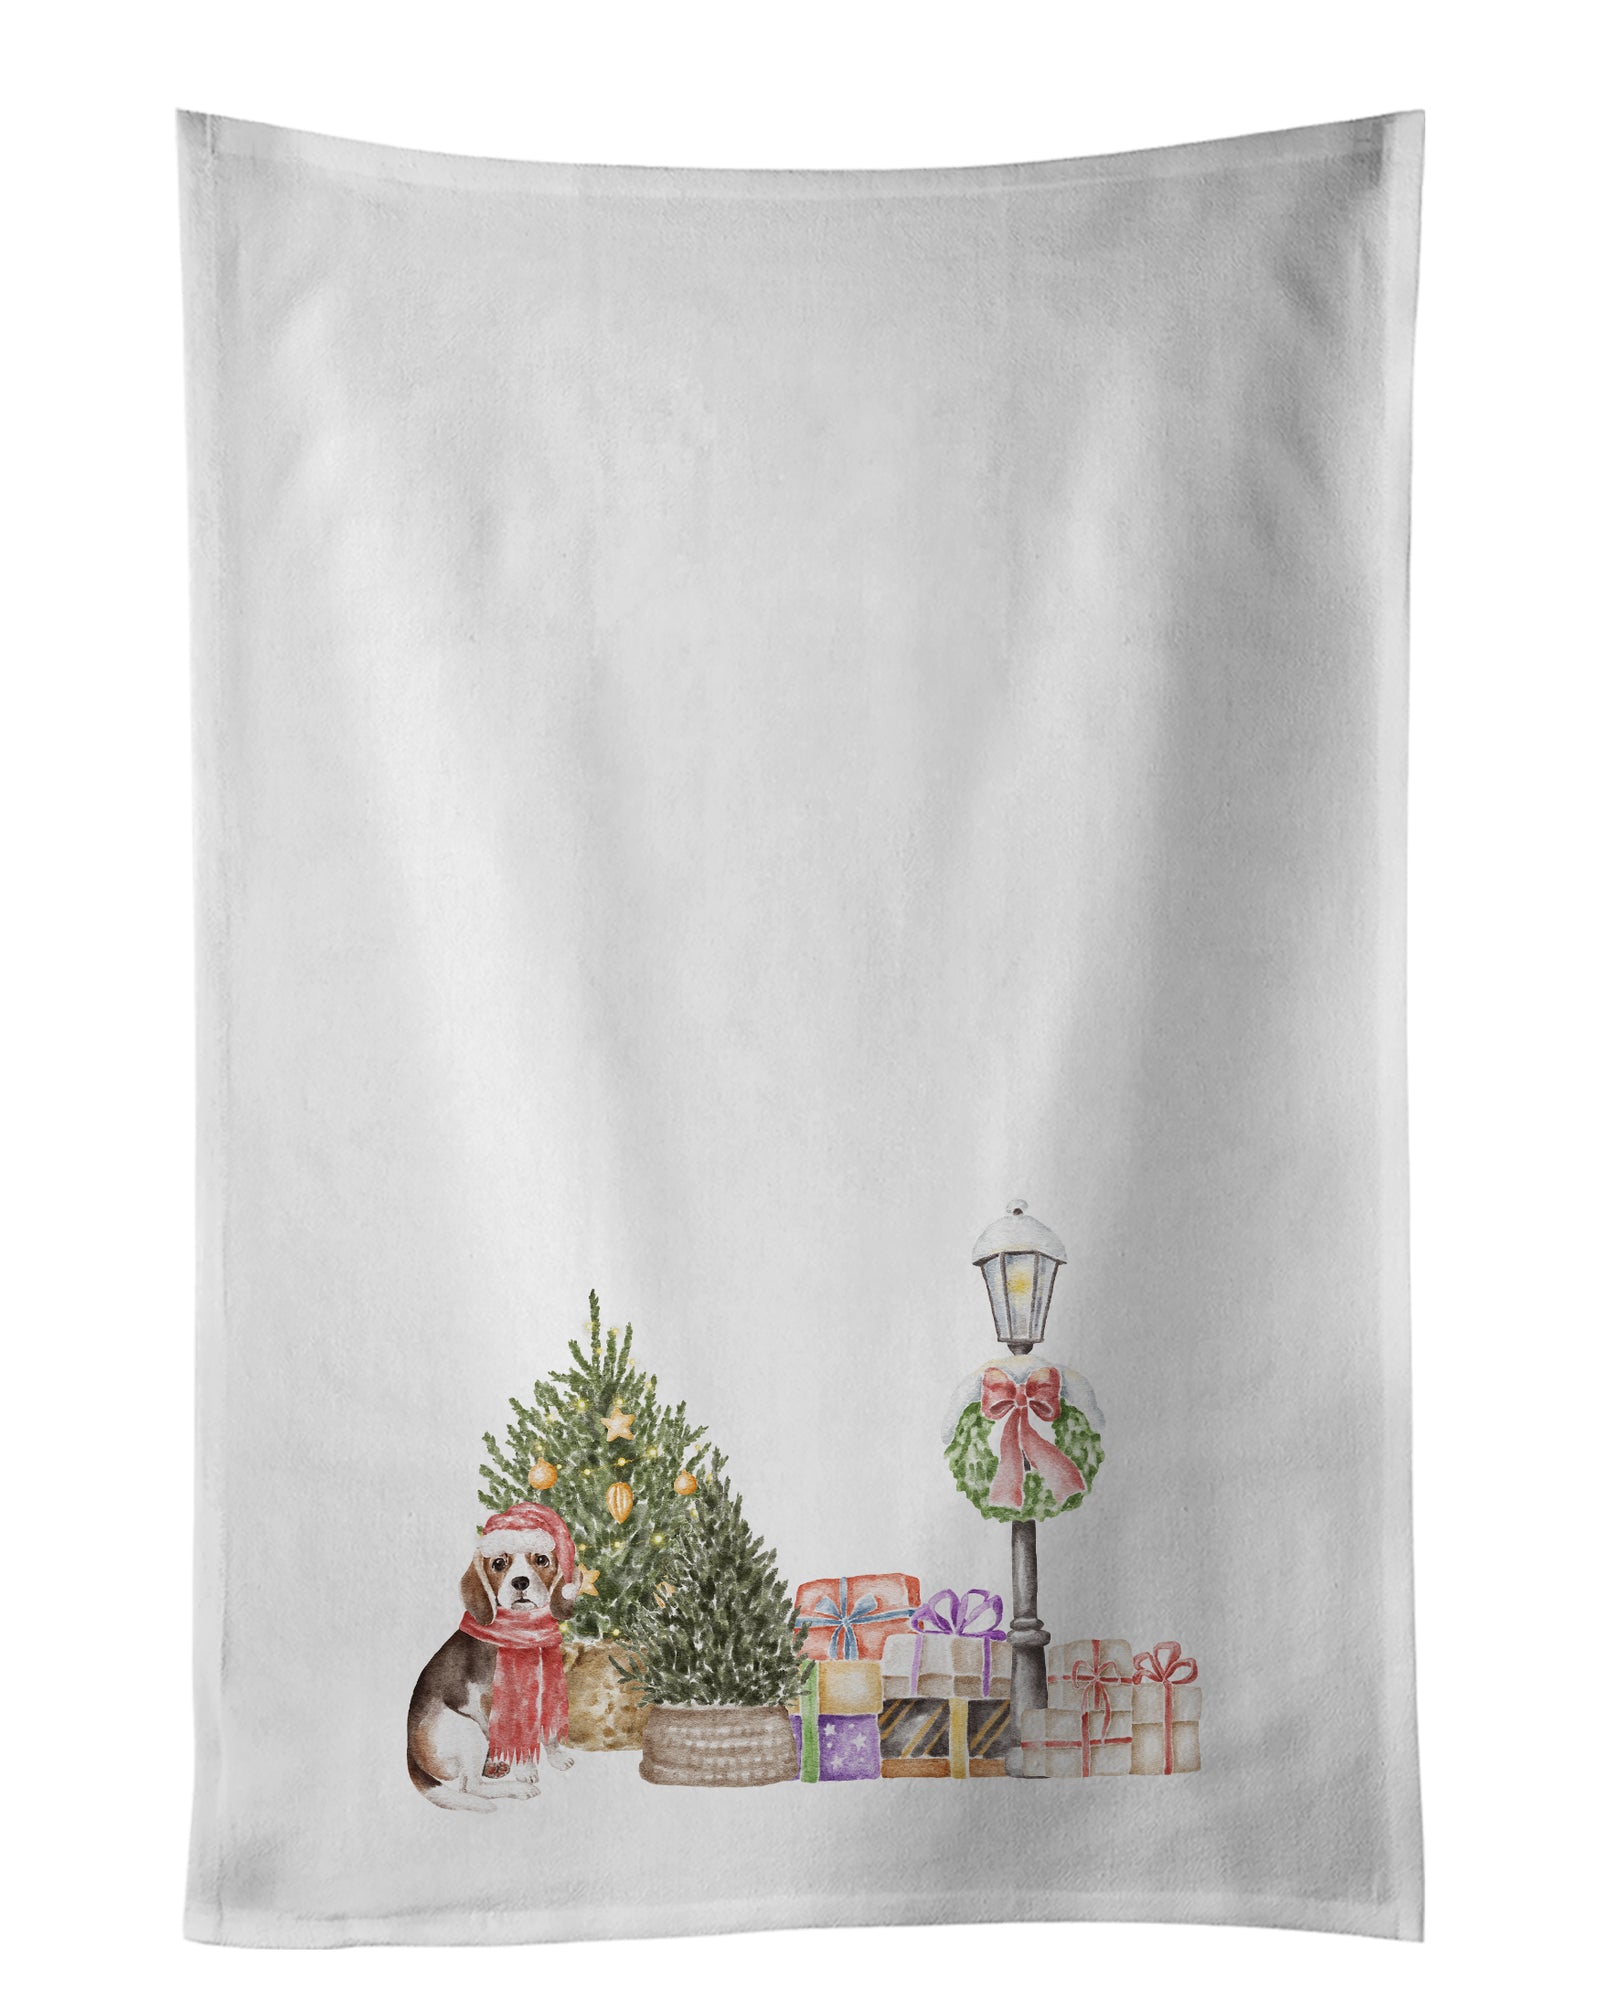 Buy this Beagle Tricolor with Christmas Wonderland White Kitchen Towel Set of 2